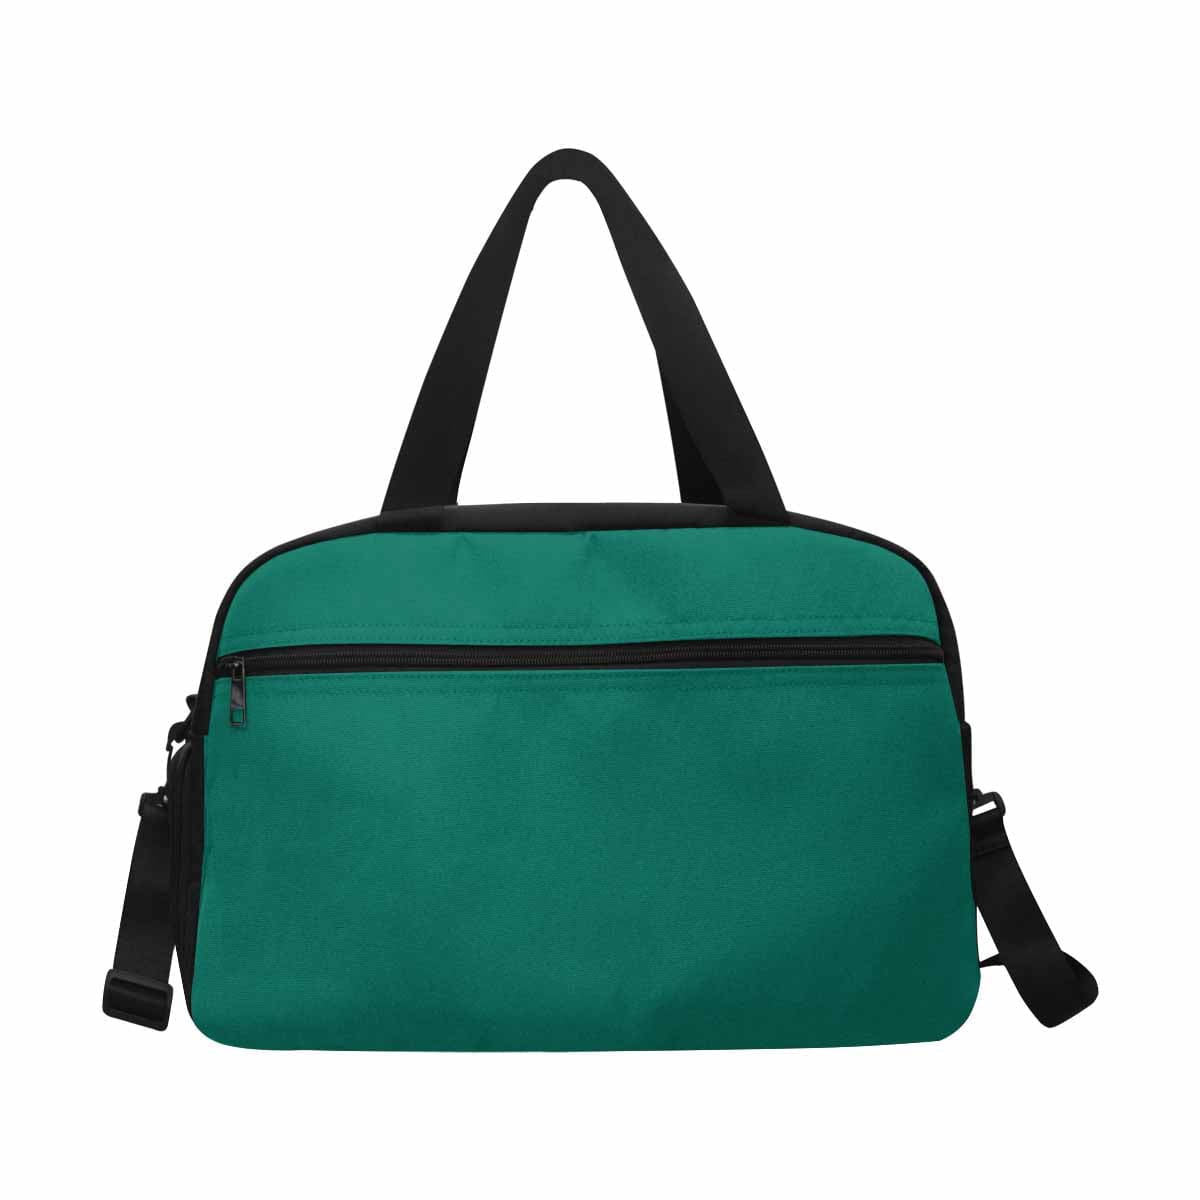 Teal Green Tote And Crossbody Travel Bag - Bags | Travel Bags | Crossbody